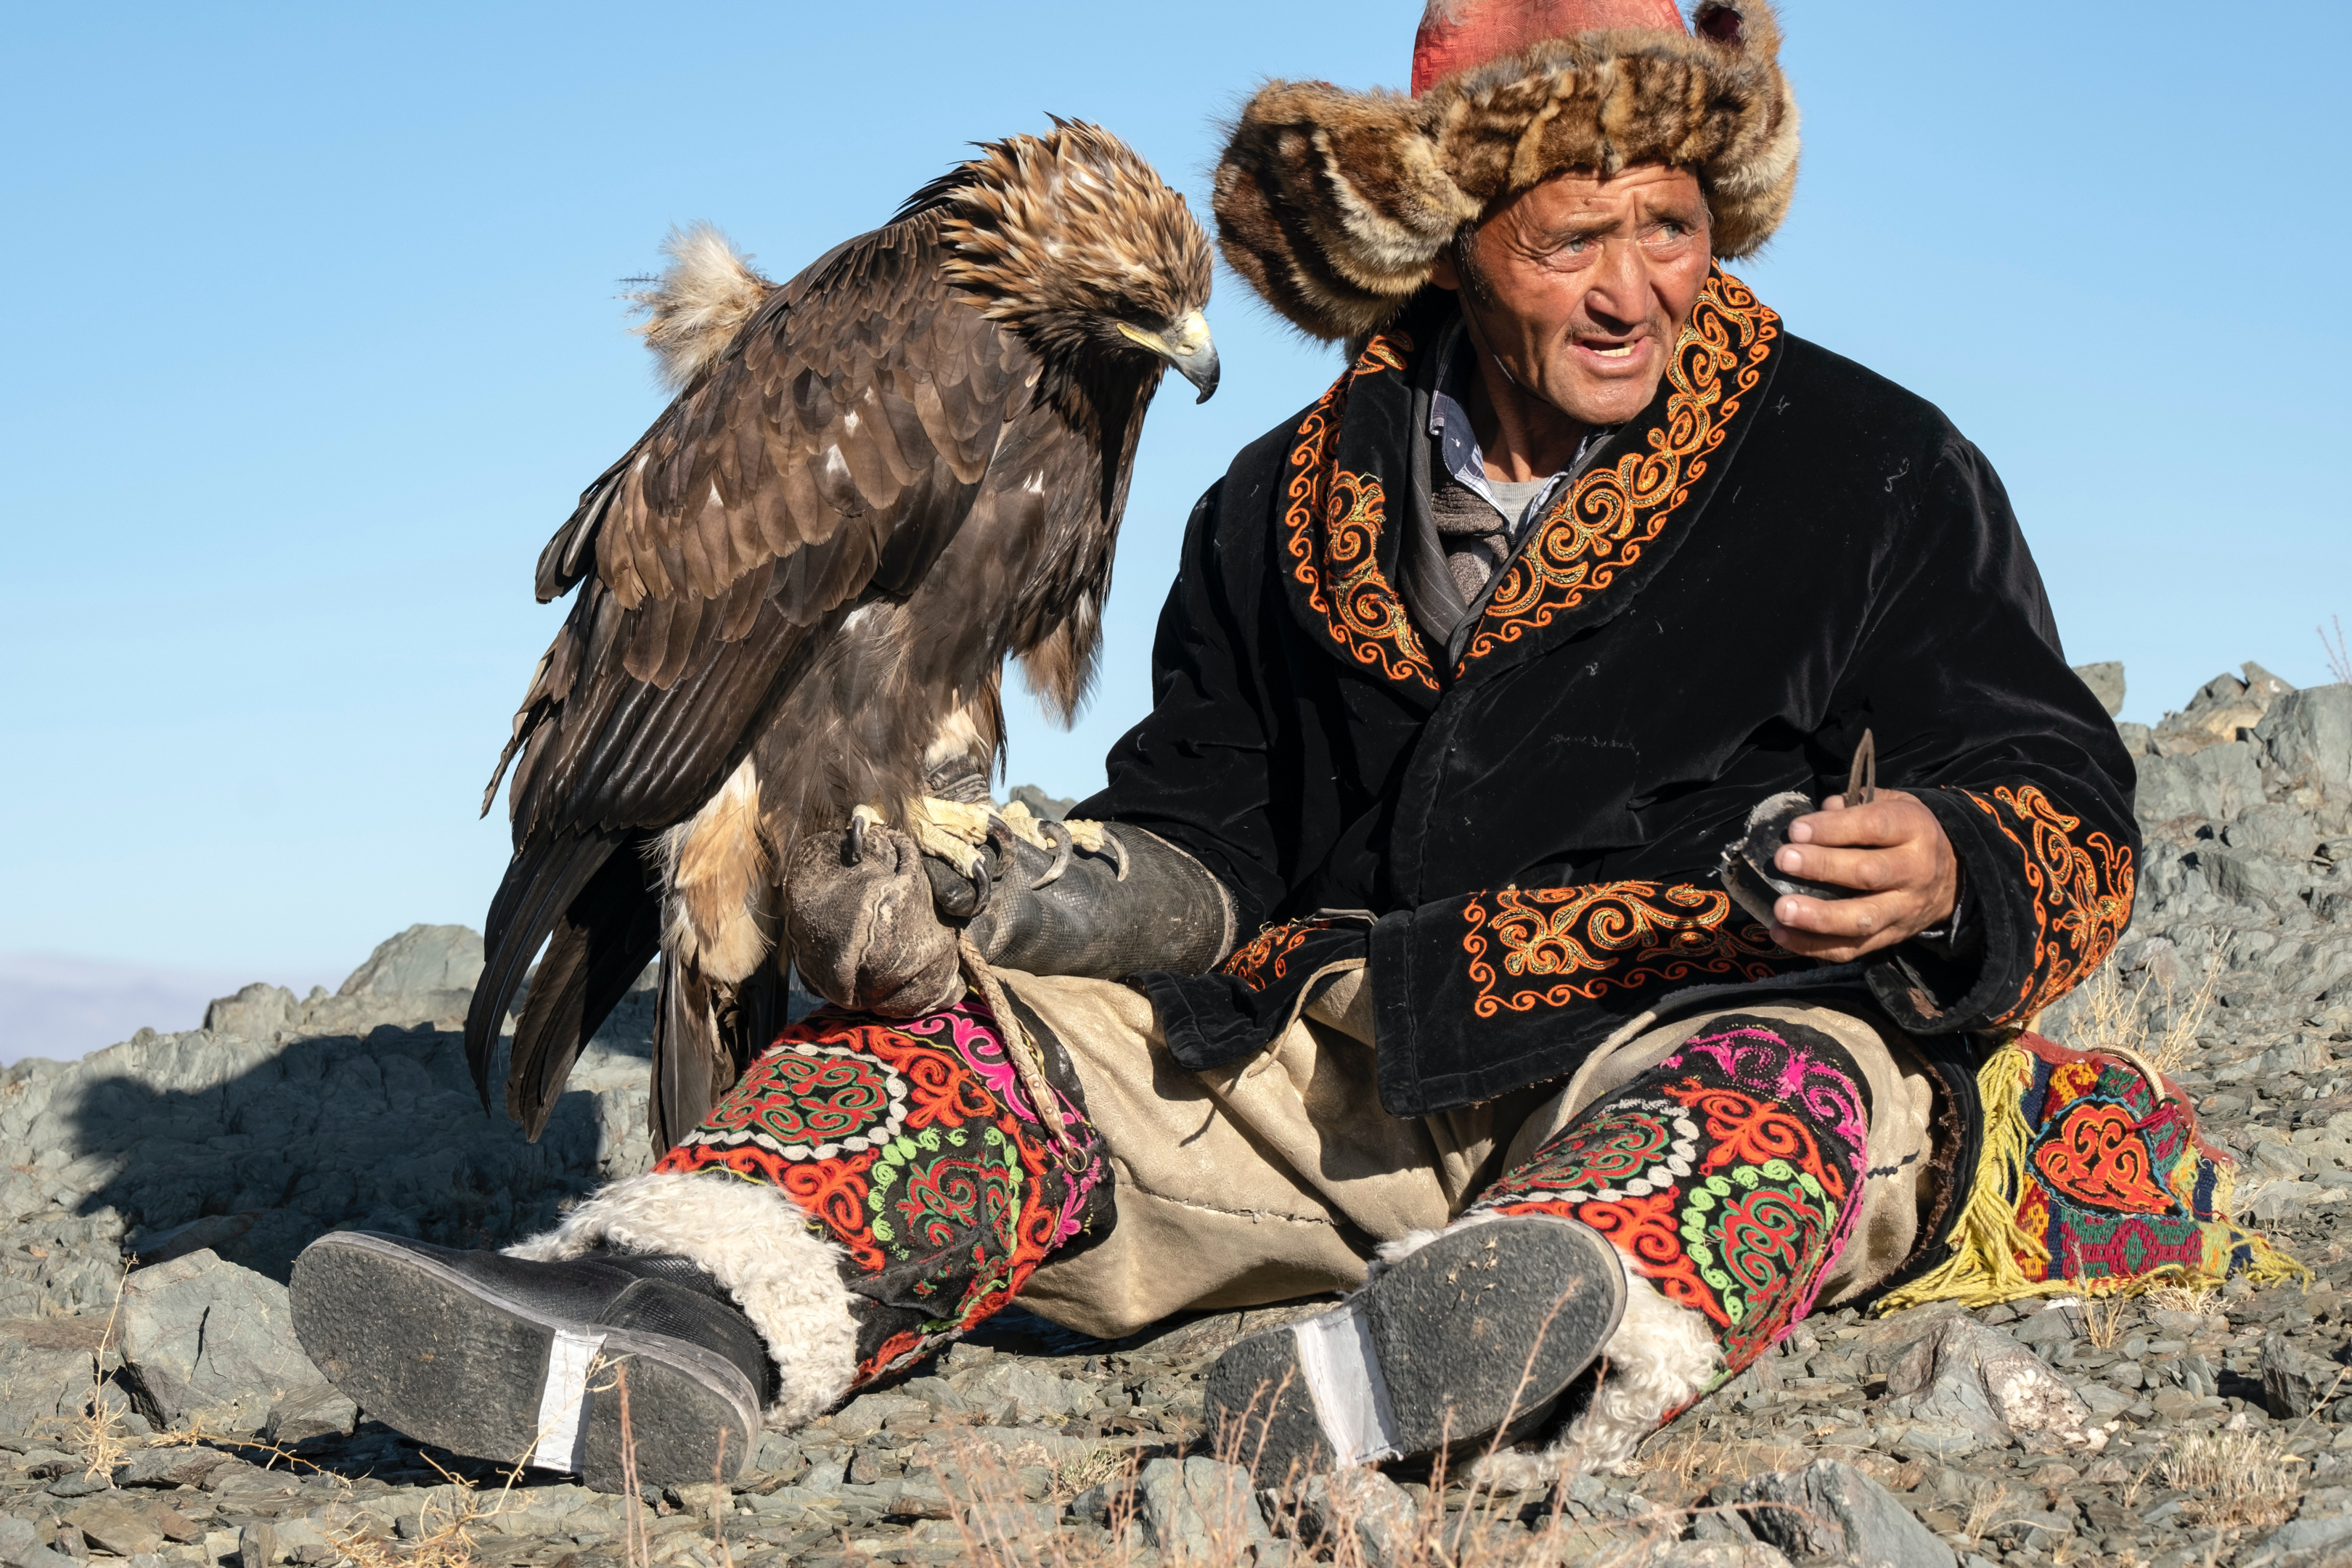 A vibrant image of the Naadam Festival in Mongolia, a must-visit event for those interested in Mongolia travel